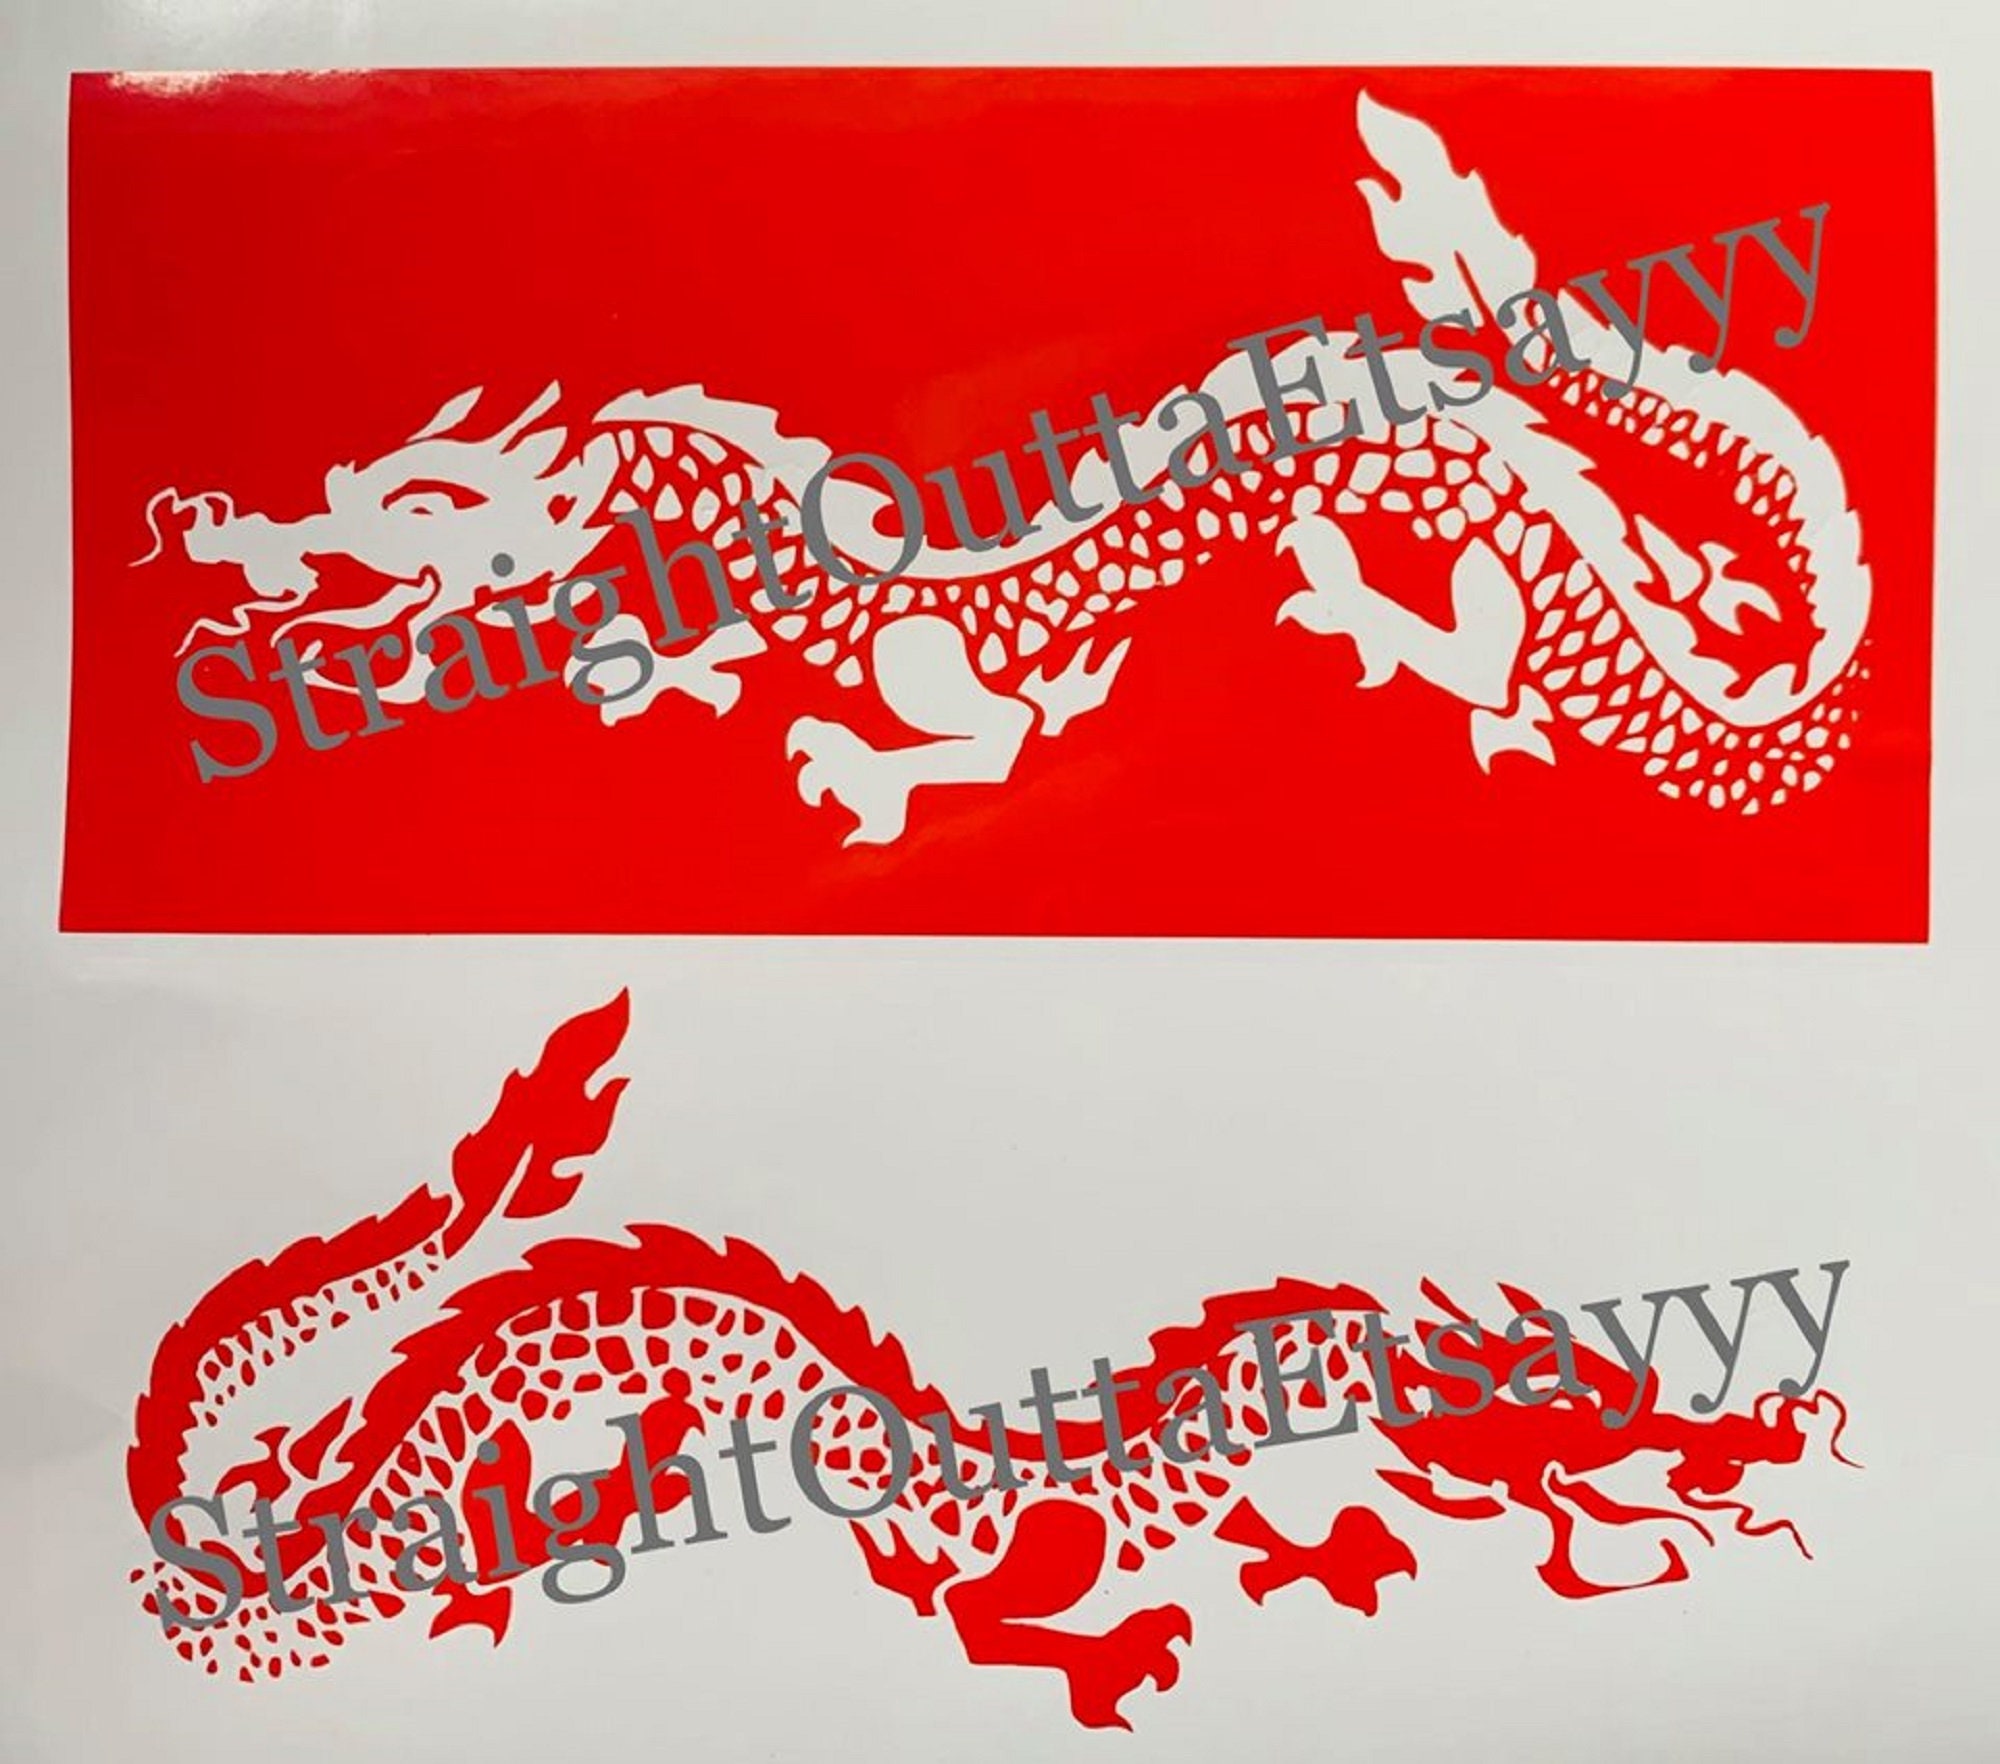 DRAGONS ZODIAC VINYL STENCIL FOR CUSTOM SHOES SNEAKERS AND SMALL PROJECTS